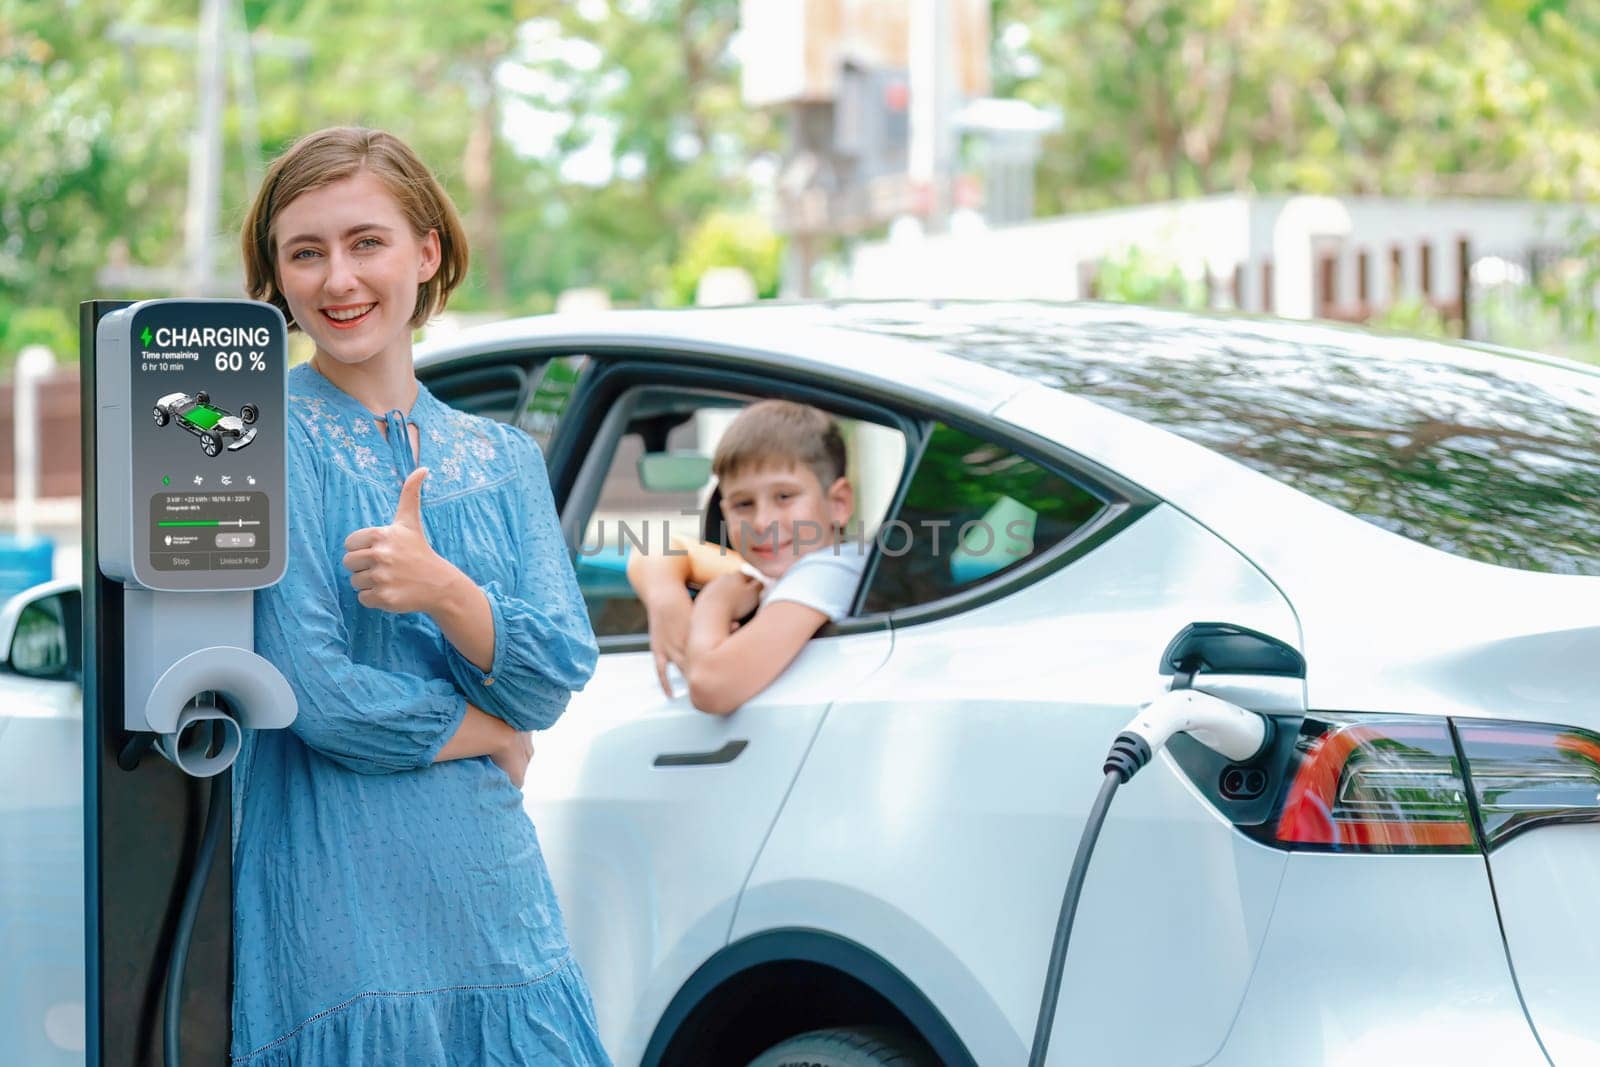 Environmental awareness family with eco-friendly electric car recharging battery from home EV charging station with little boy inside the car. Rechargeable and EV car technology. Perpetual